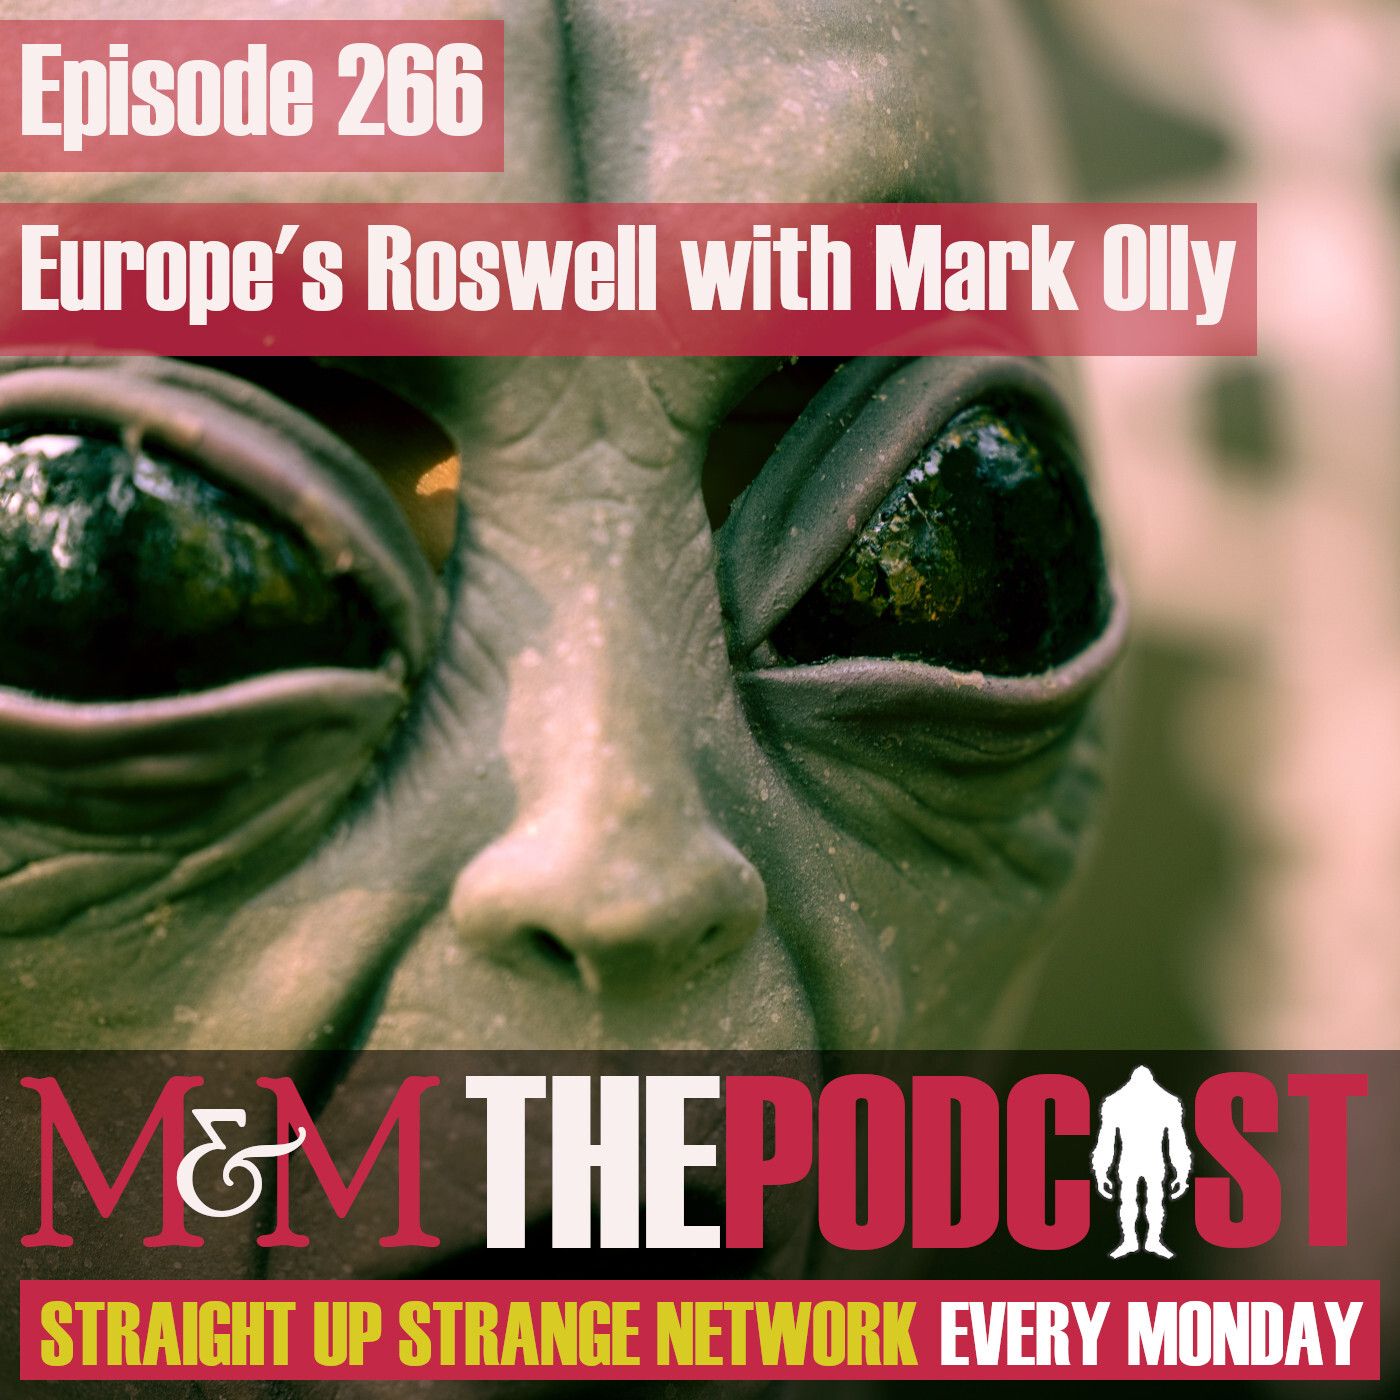 Mysteries and Monsters: Episode 266 Europe's Roswell with Mark Olly